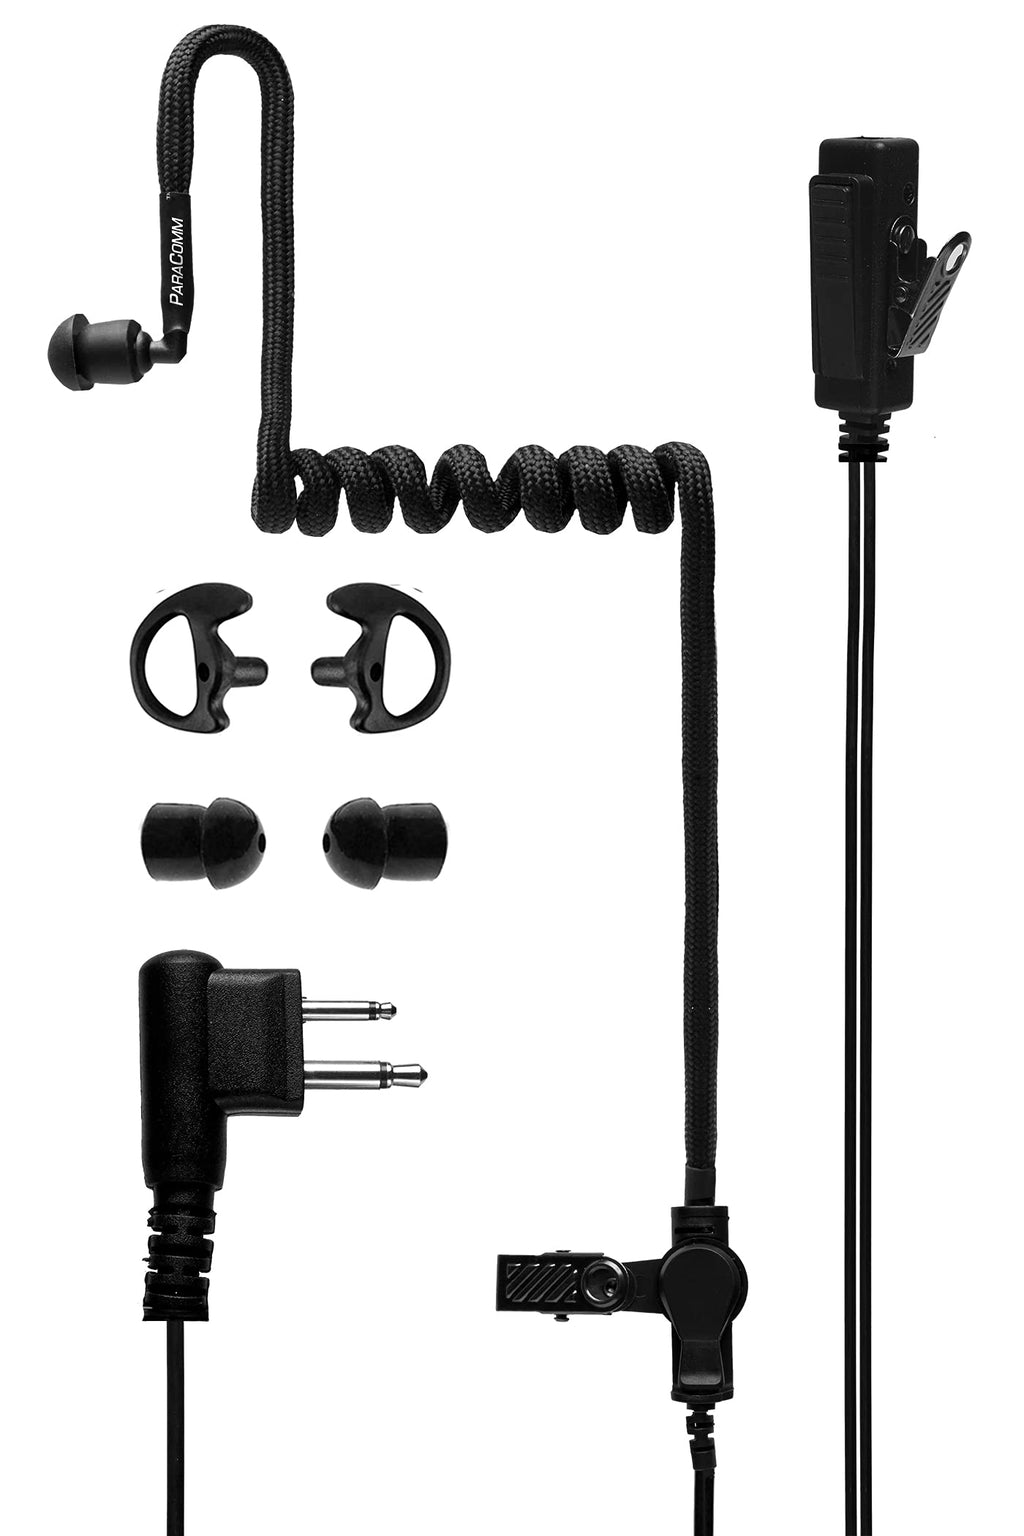 [Australia - AusPower] - Moisture Resistant Acoustic Tube with Walkie Talkie Earpiece with Mic - Motorola Compatible Headset Surveillance 2 Prong Pin CP185 CP200 CP200D CLS1110 T600 T800 Radios. with 2 Earmolds by ParaComm 